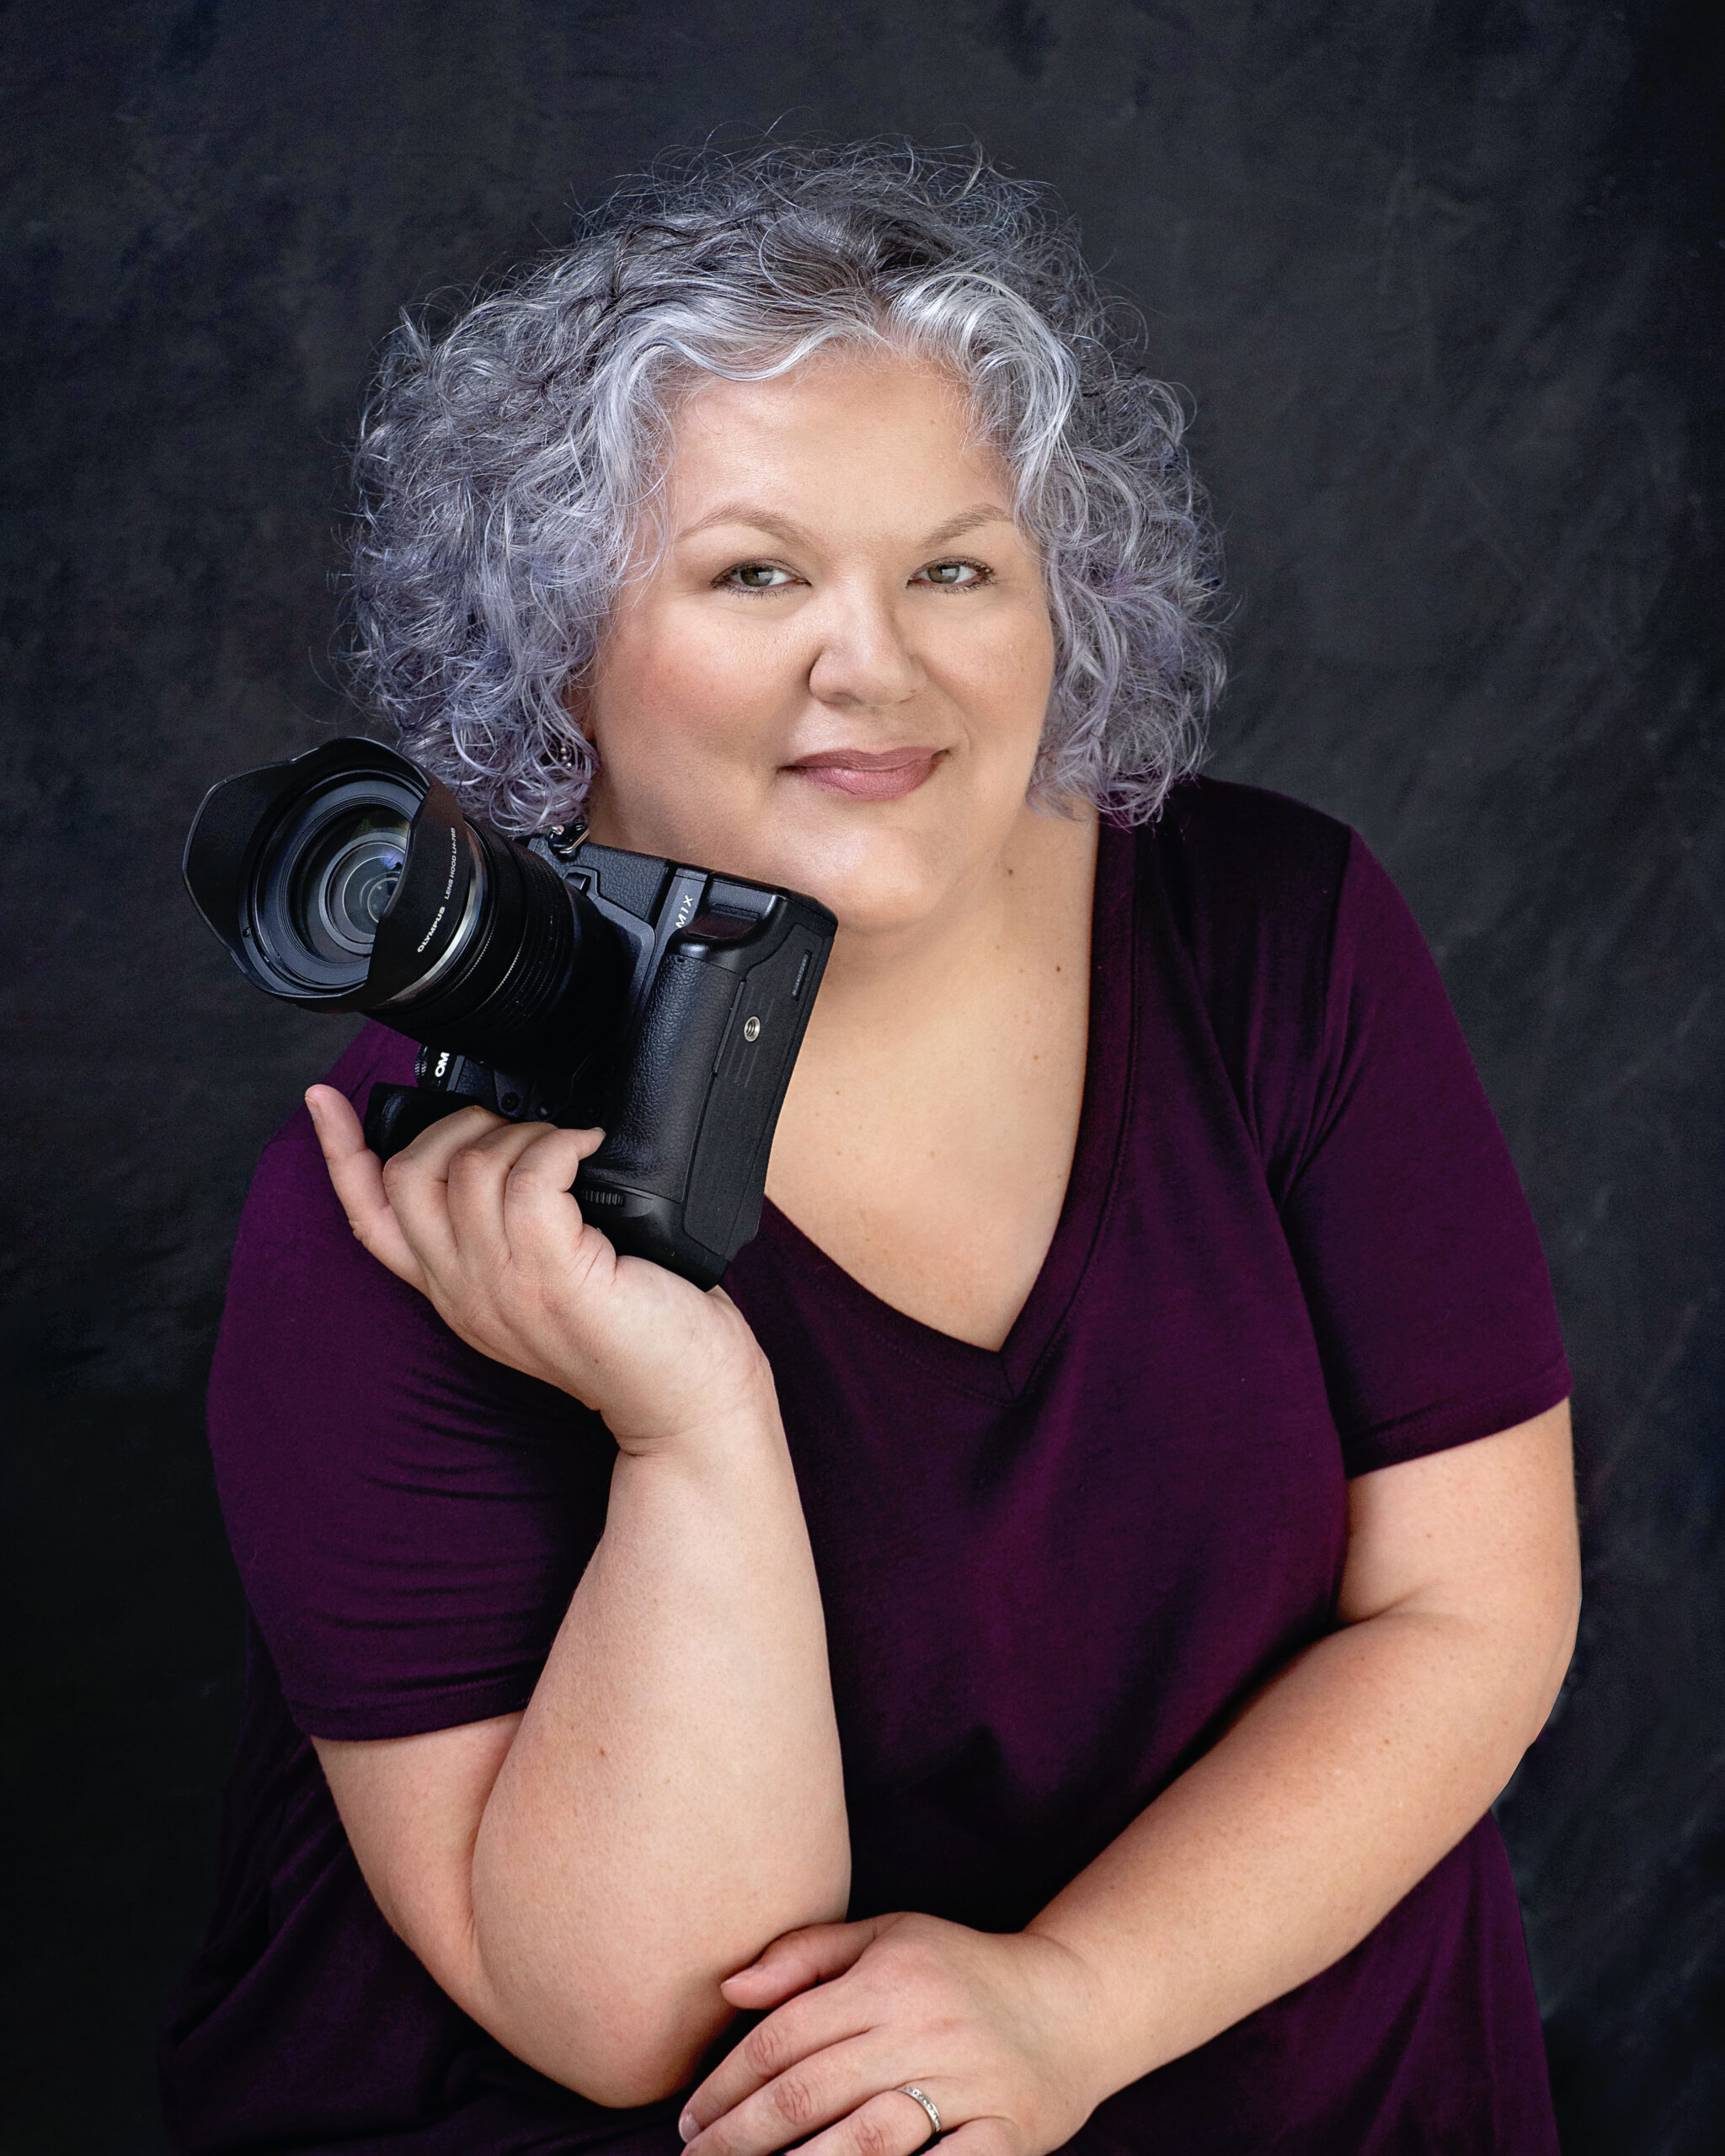 Cassandra Bayer portrait. A woman with gray/white hair in a black tshirt holding a DSLR camera.